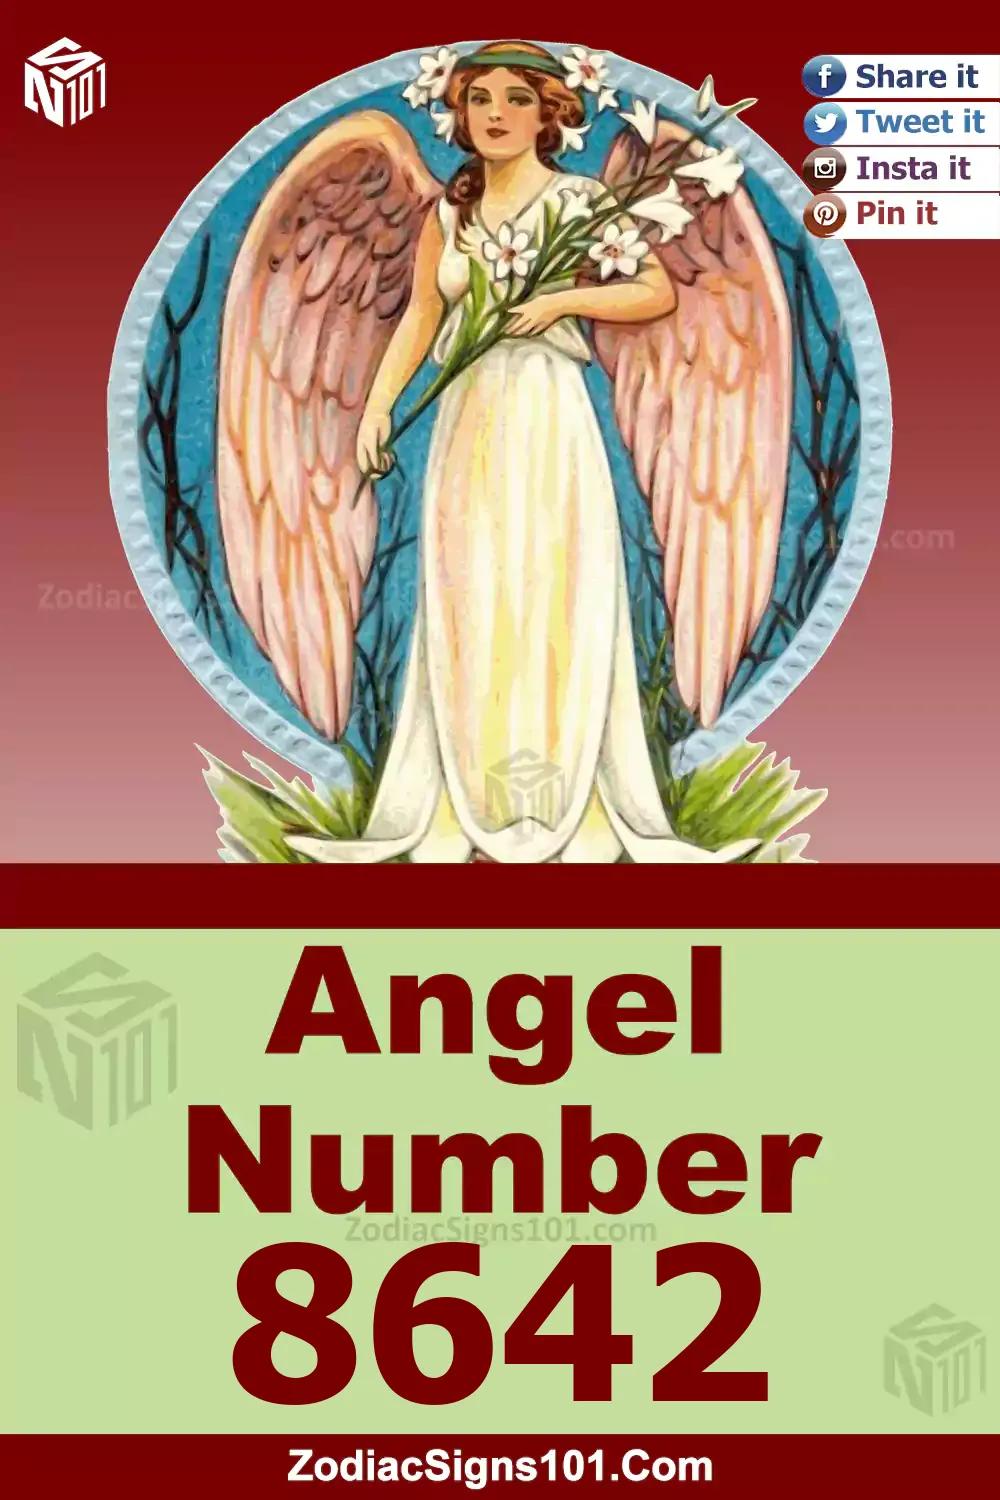 8642 Angel Number Meaning